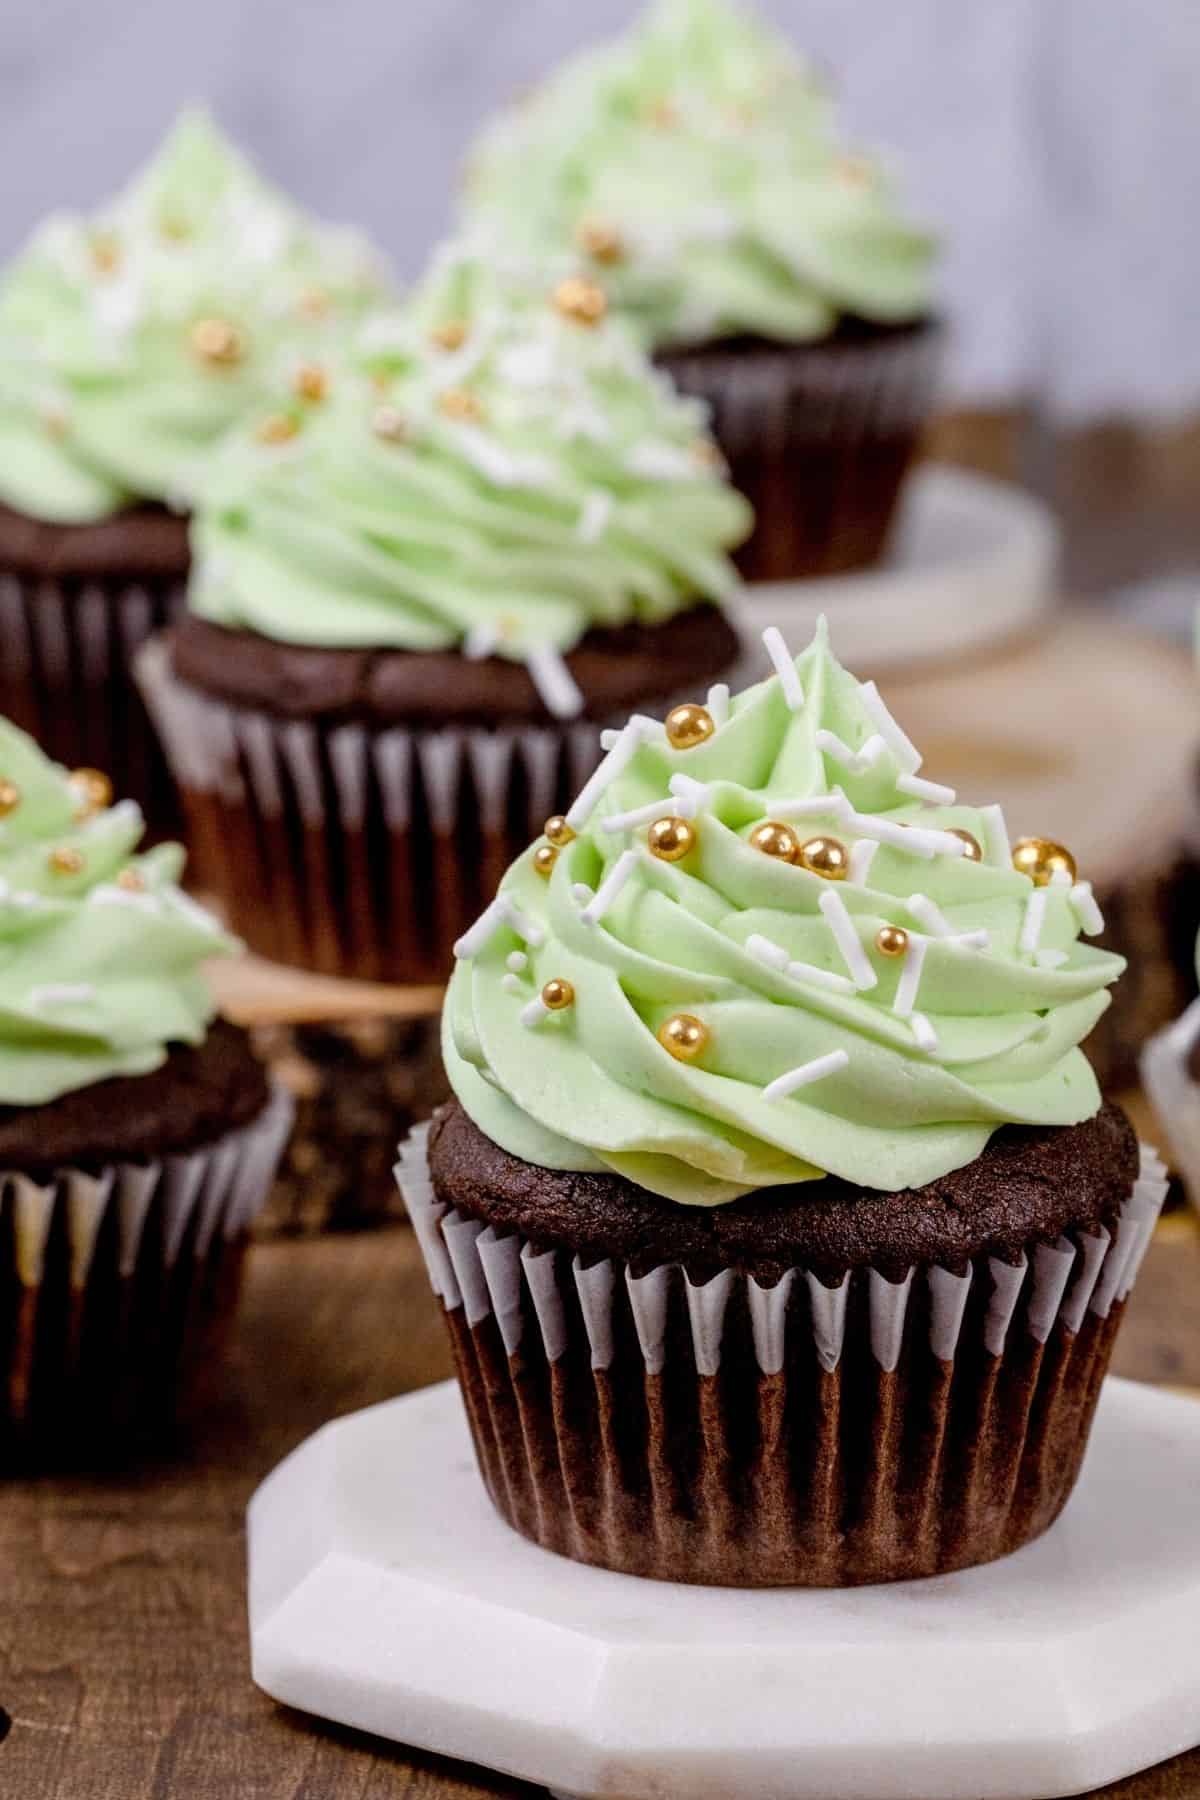 Close up of a single chocolate cupcake on a white platform. Green mint frosting is on top with gold and white sprinkles. More cupcakes are blurred in the background.